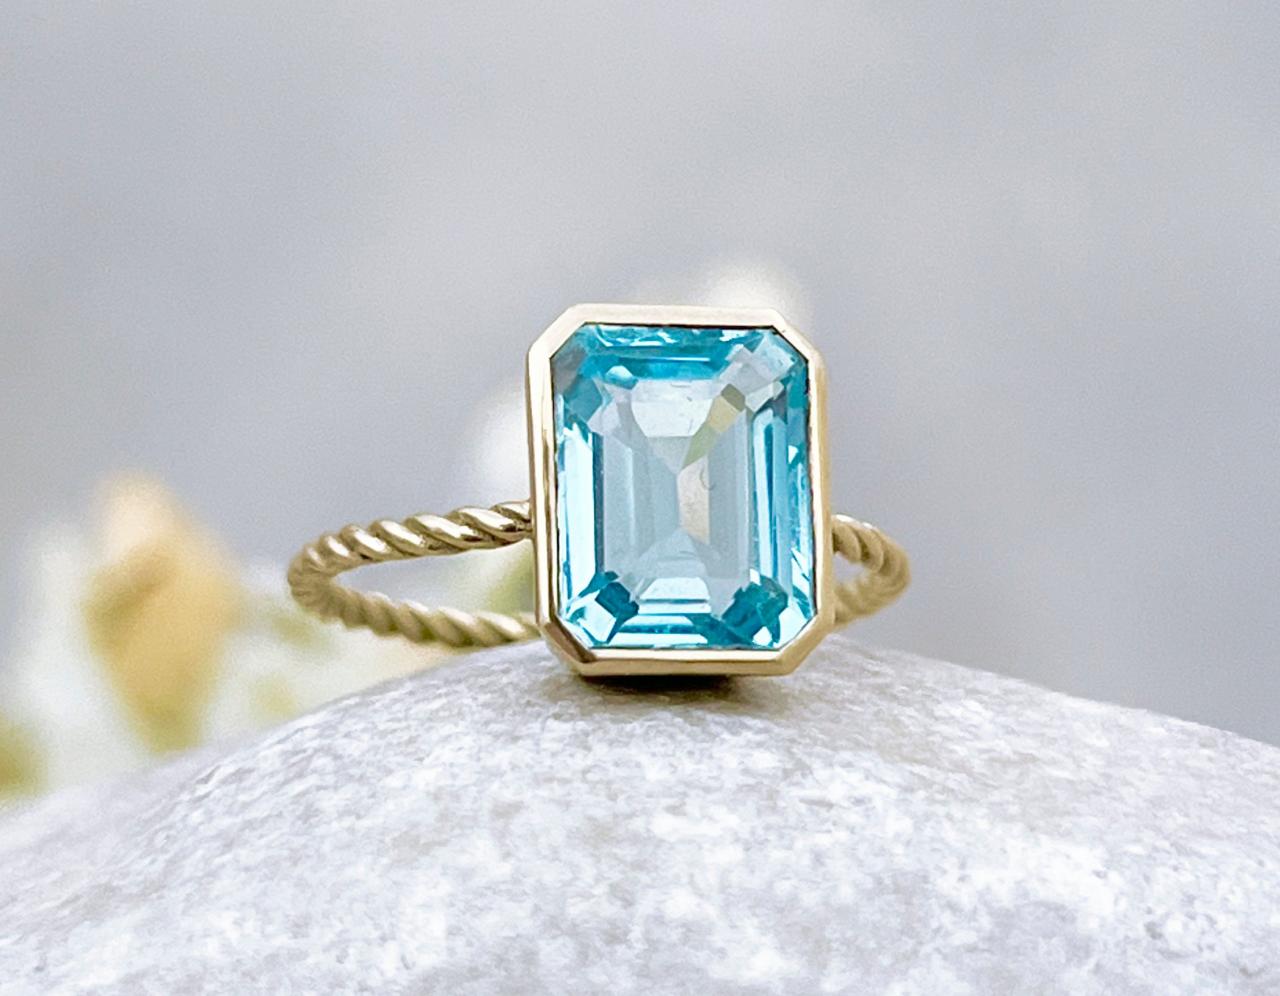 Solid Gold Solitaire Engagement Ring With Emerald Cut Blue Topaz, 18k Modern Style Twist Ring, Natural Light Blue Stone Proposal Ring